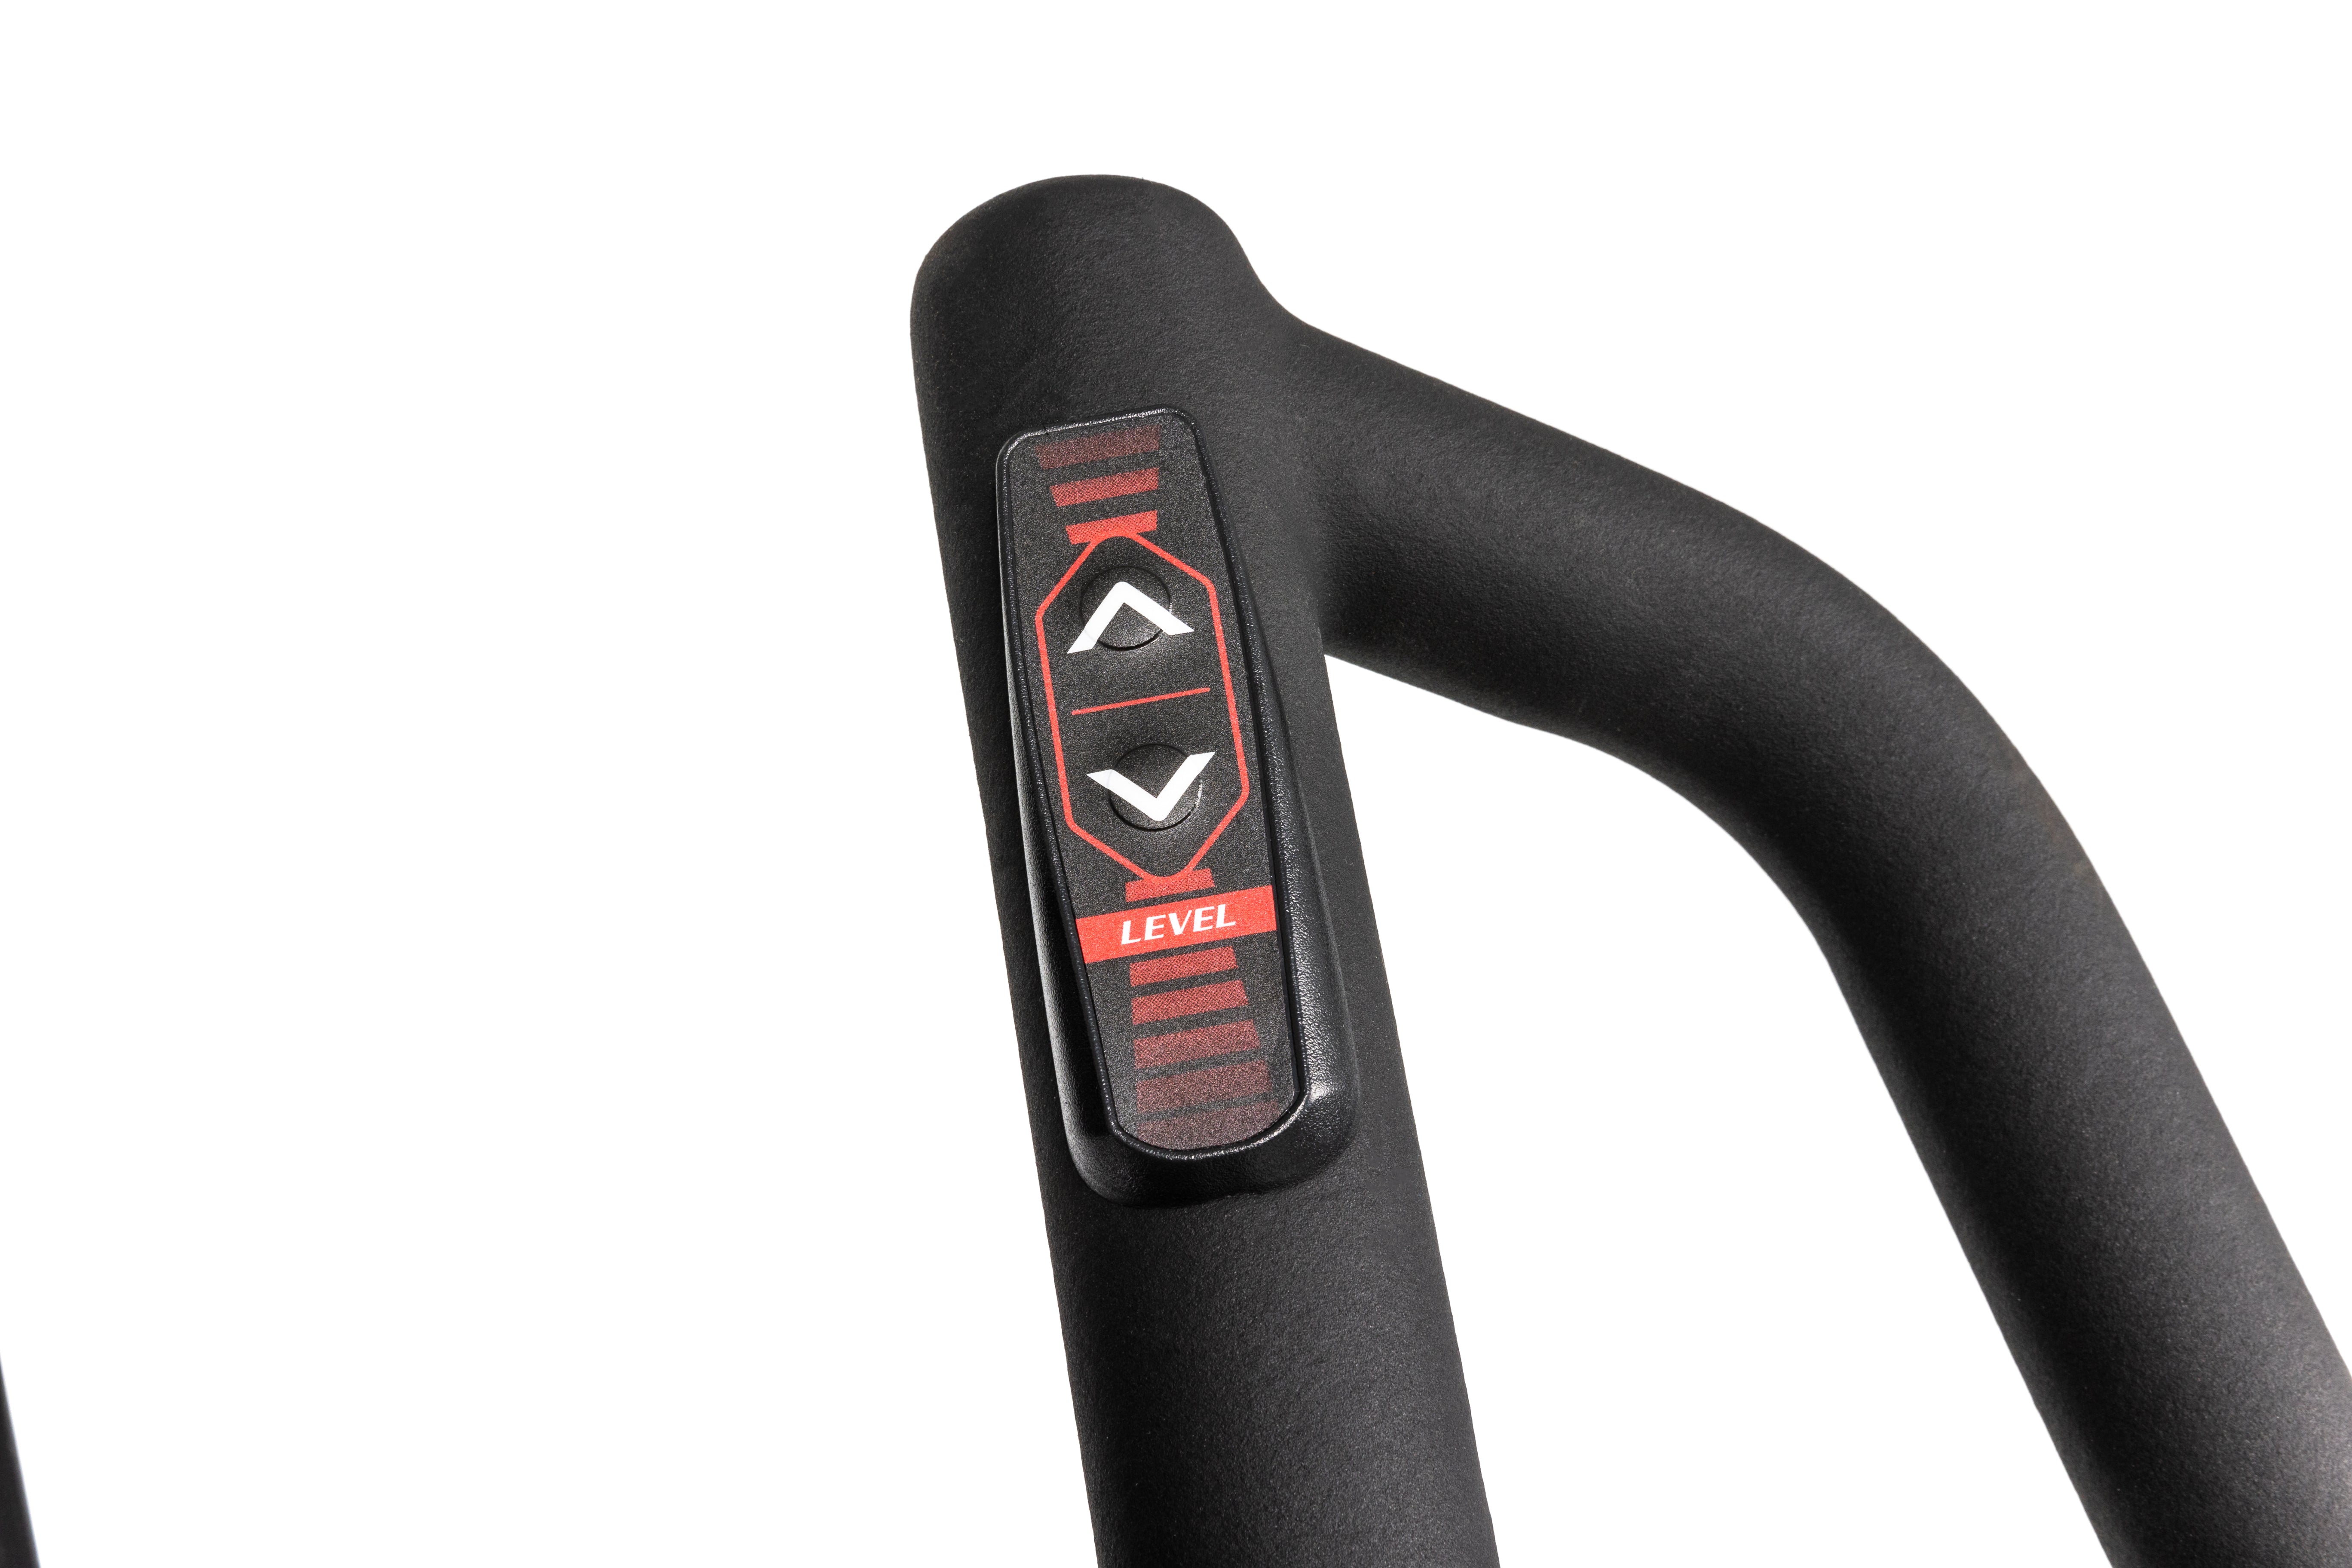 Close-up view of the Sole E95 elliptical trainer's handlebar, showcasing the 'LEVEL' control buttons. The button panel is red with white arrow symbols pointing up and down for resistance adjustments. The handlebar has a matte black finish.